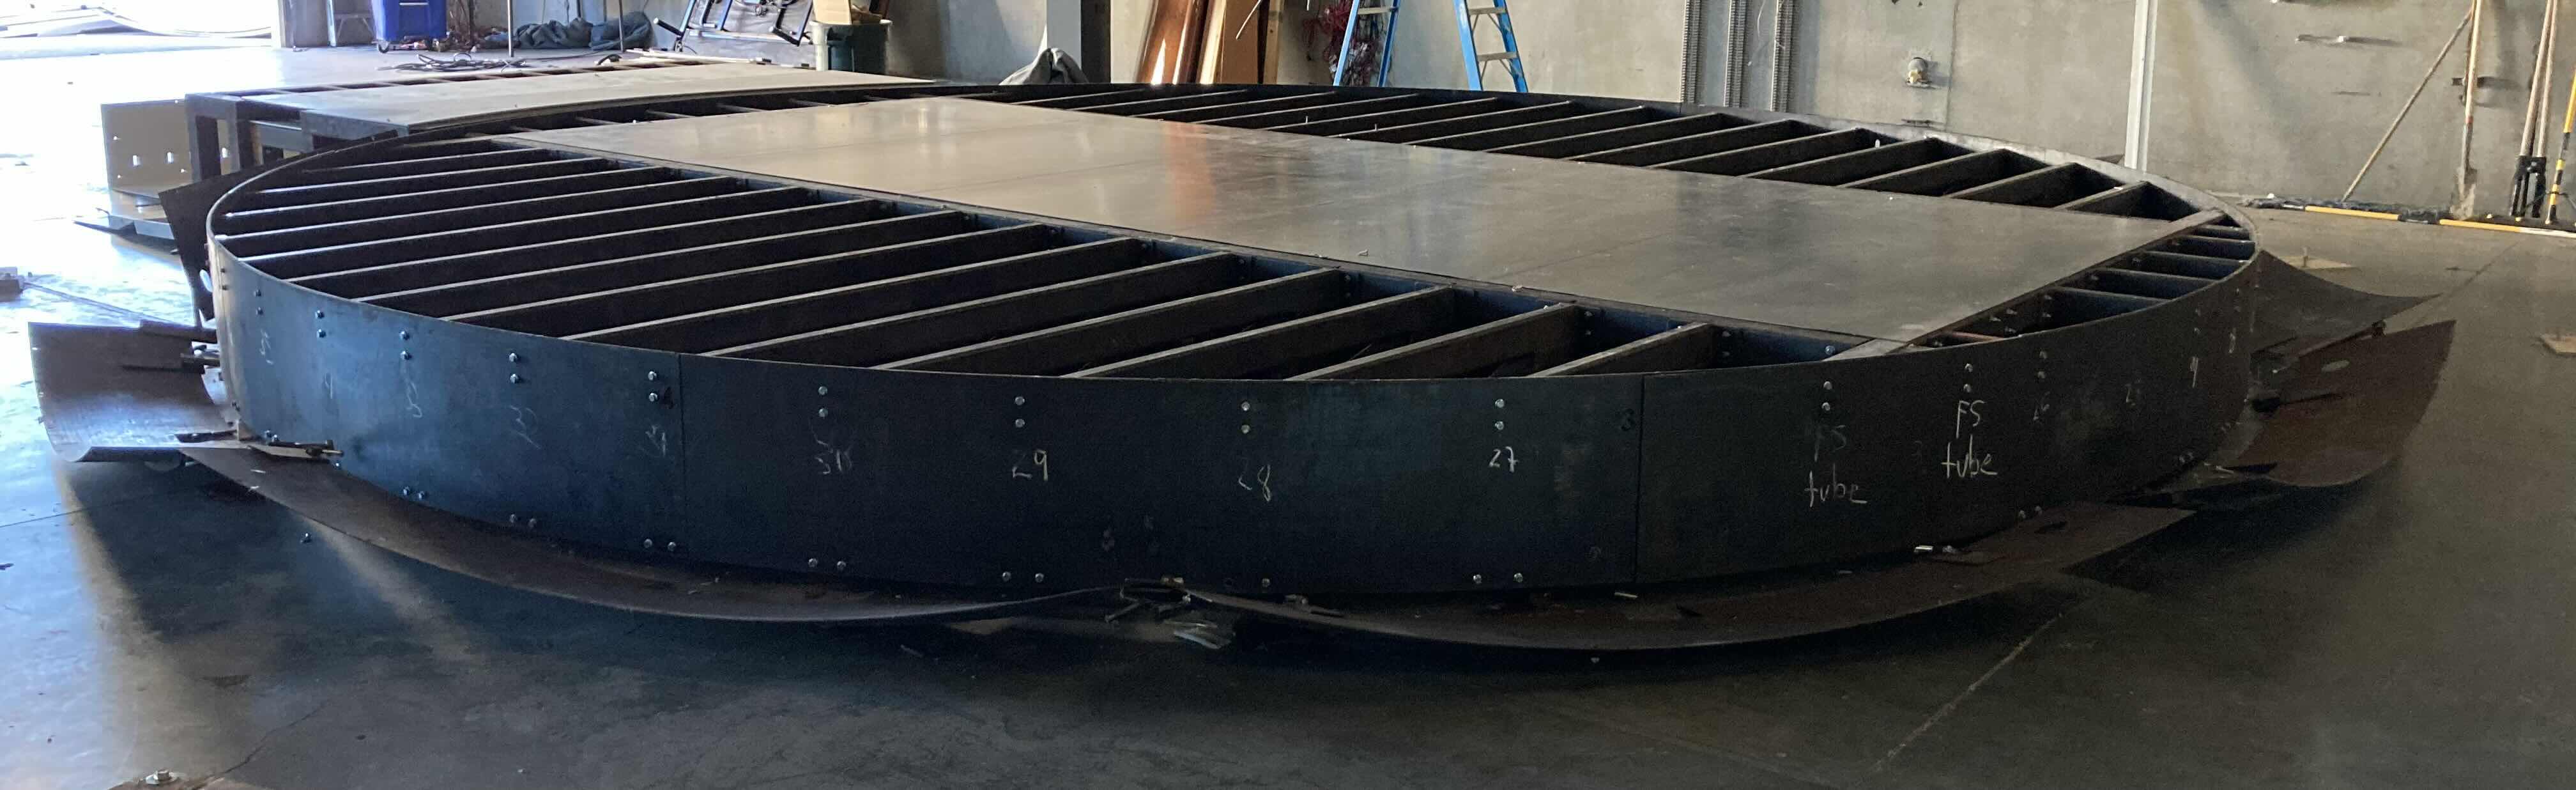 Photo 3 of CUSTOM FABRICATED HEAVY-DUTY STEEL AIR HOSE OPERATED VEHICLE PLATFORM W 19 AIR HOSES FOR BAG LIFT- VARIOUS LENGTHS & PSI CAPACITY 353” X 282” H23” (APPOX 2-3TONS)